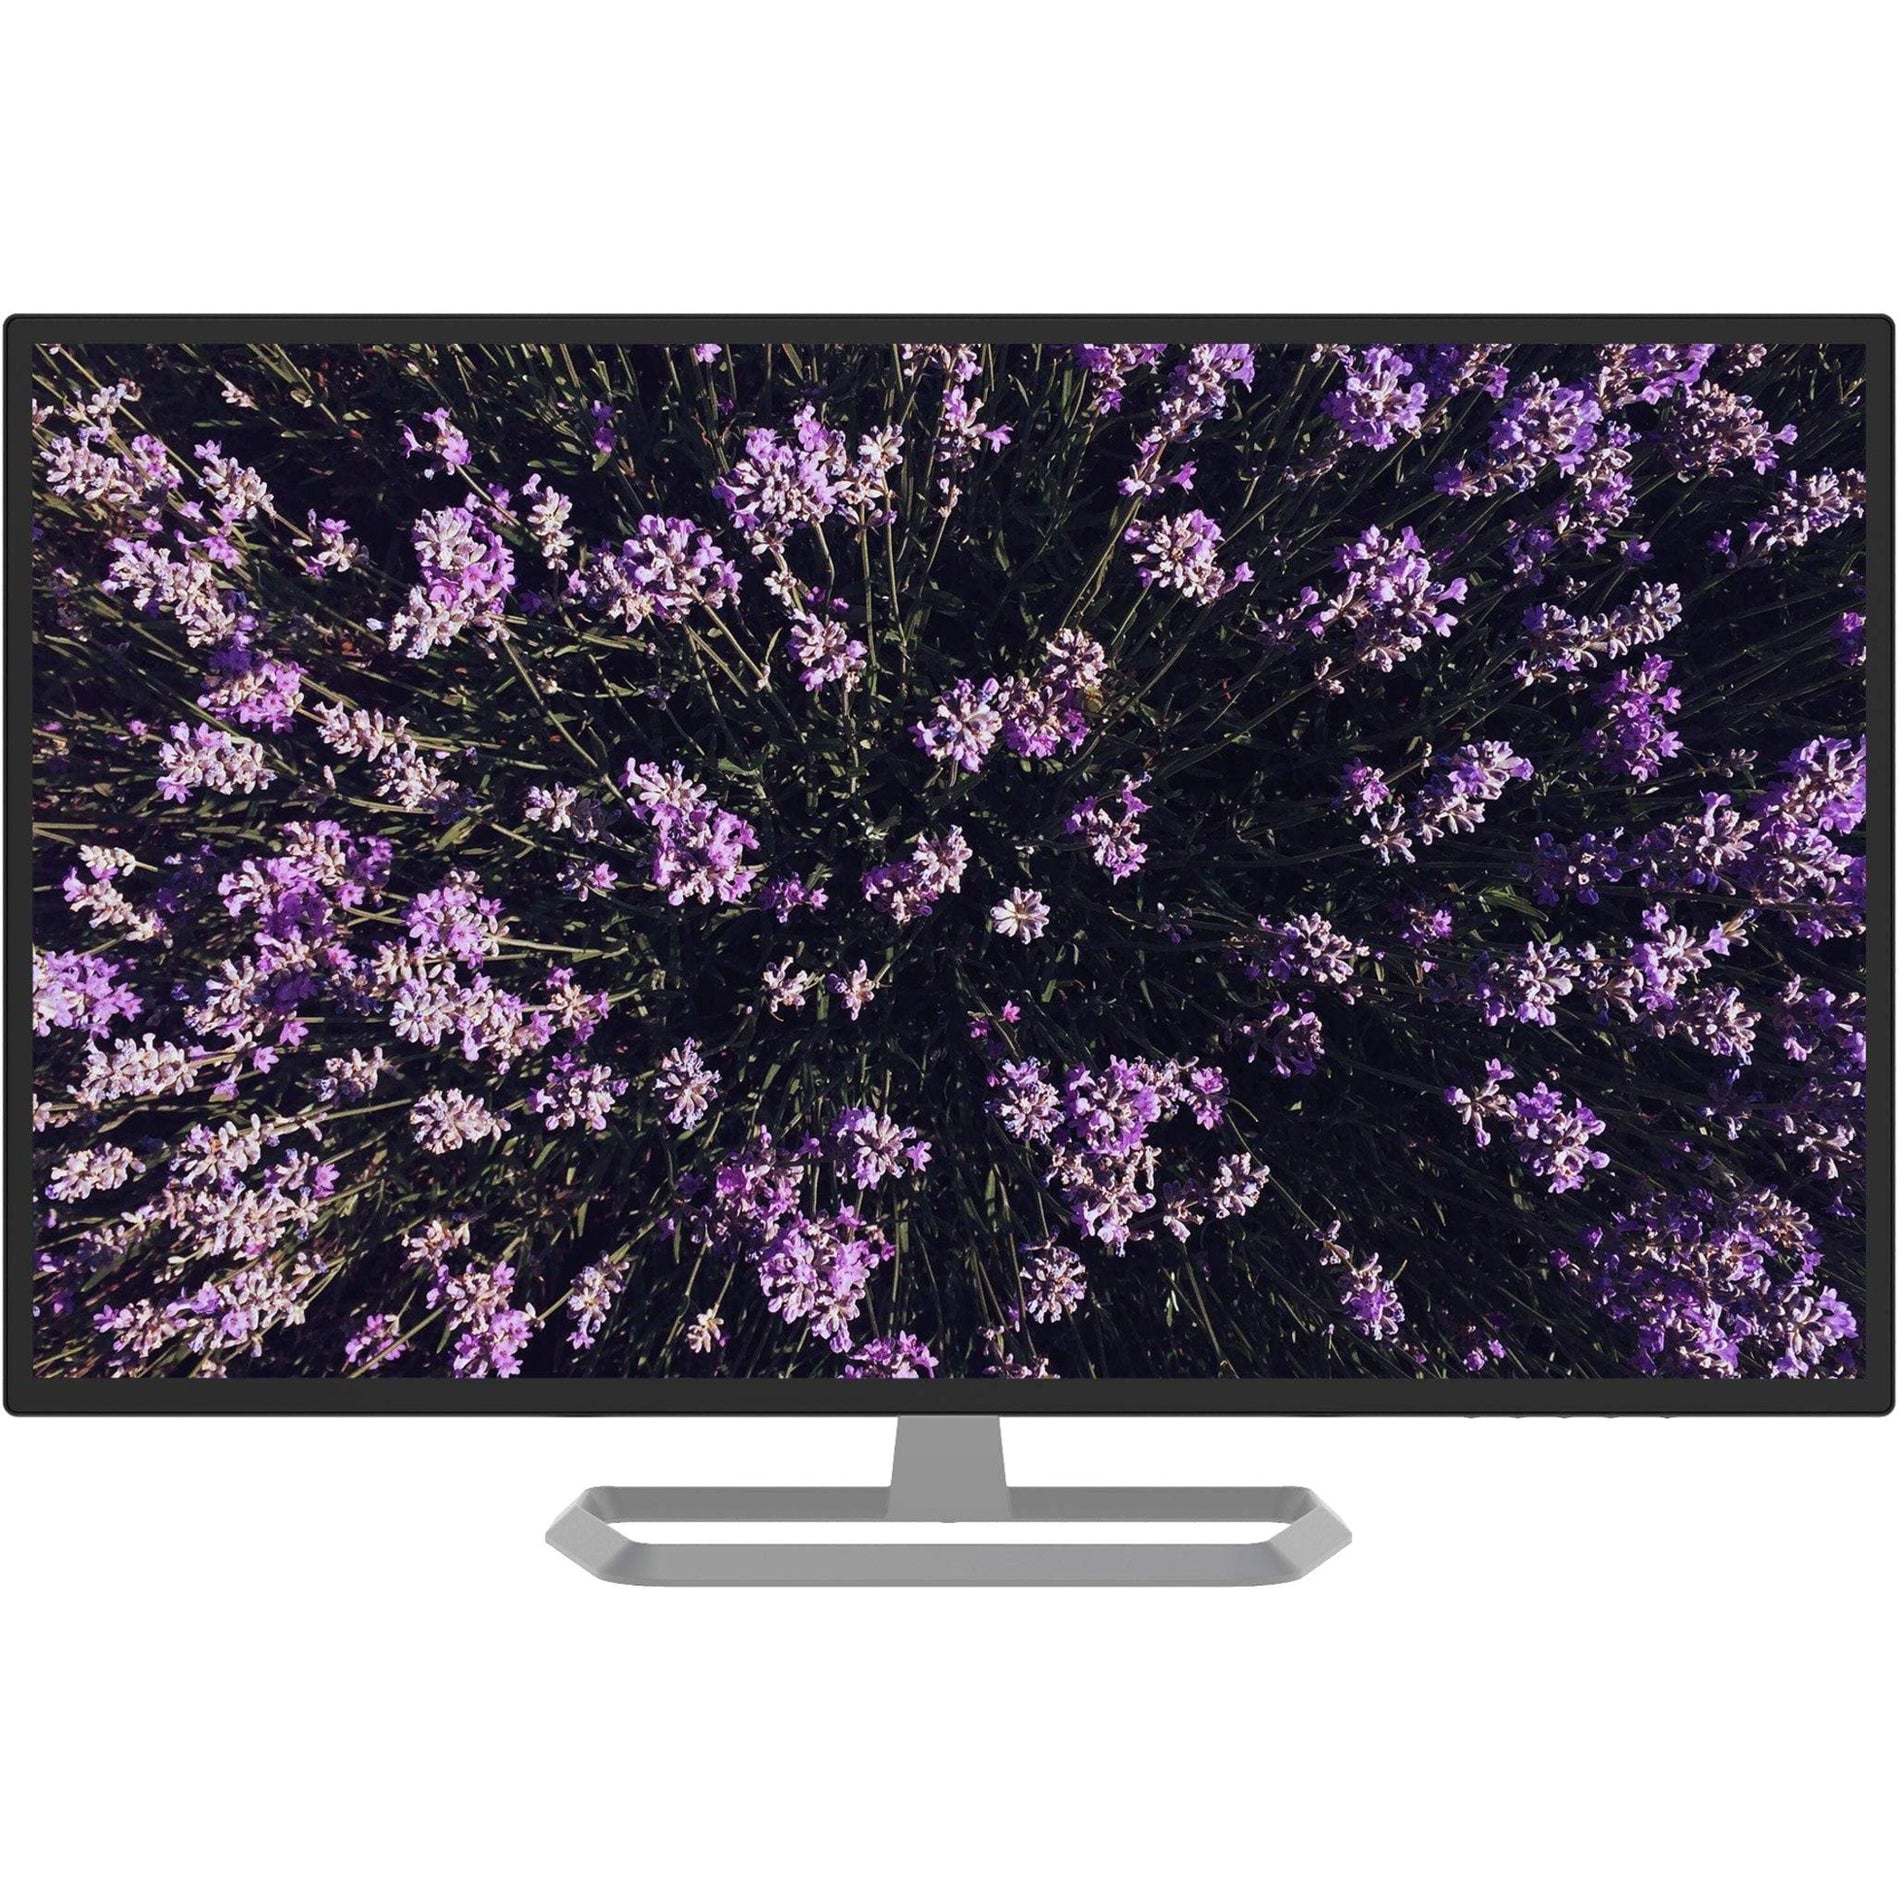 CTL MTX3200 X3200 32" WQHD LCD Monitor, Wide Viewing Angle, 2560 x 1440 Resolution, 16:9 Aspect Ratio